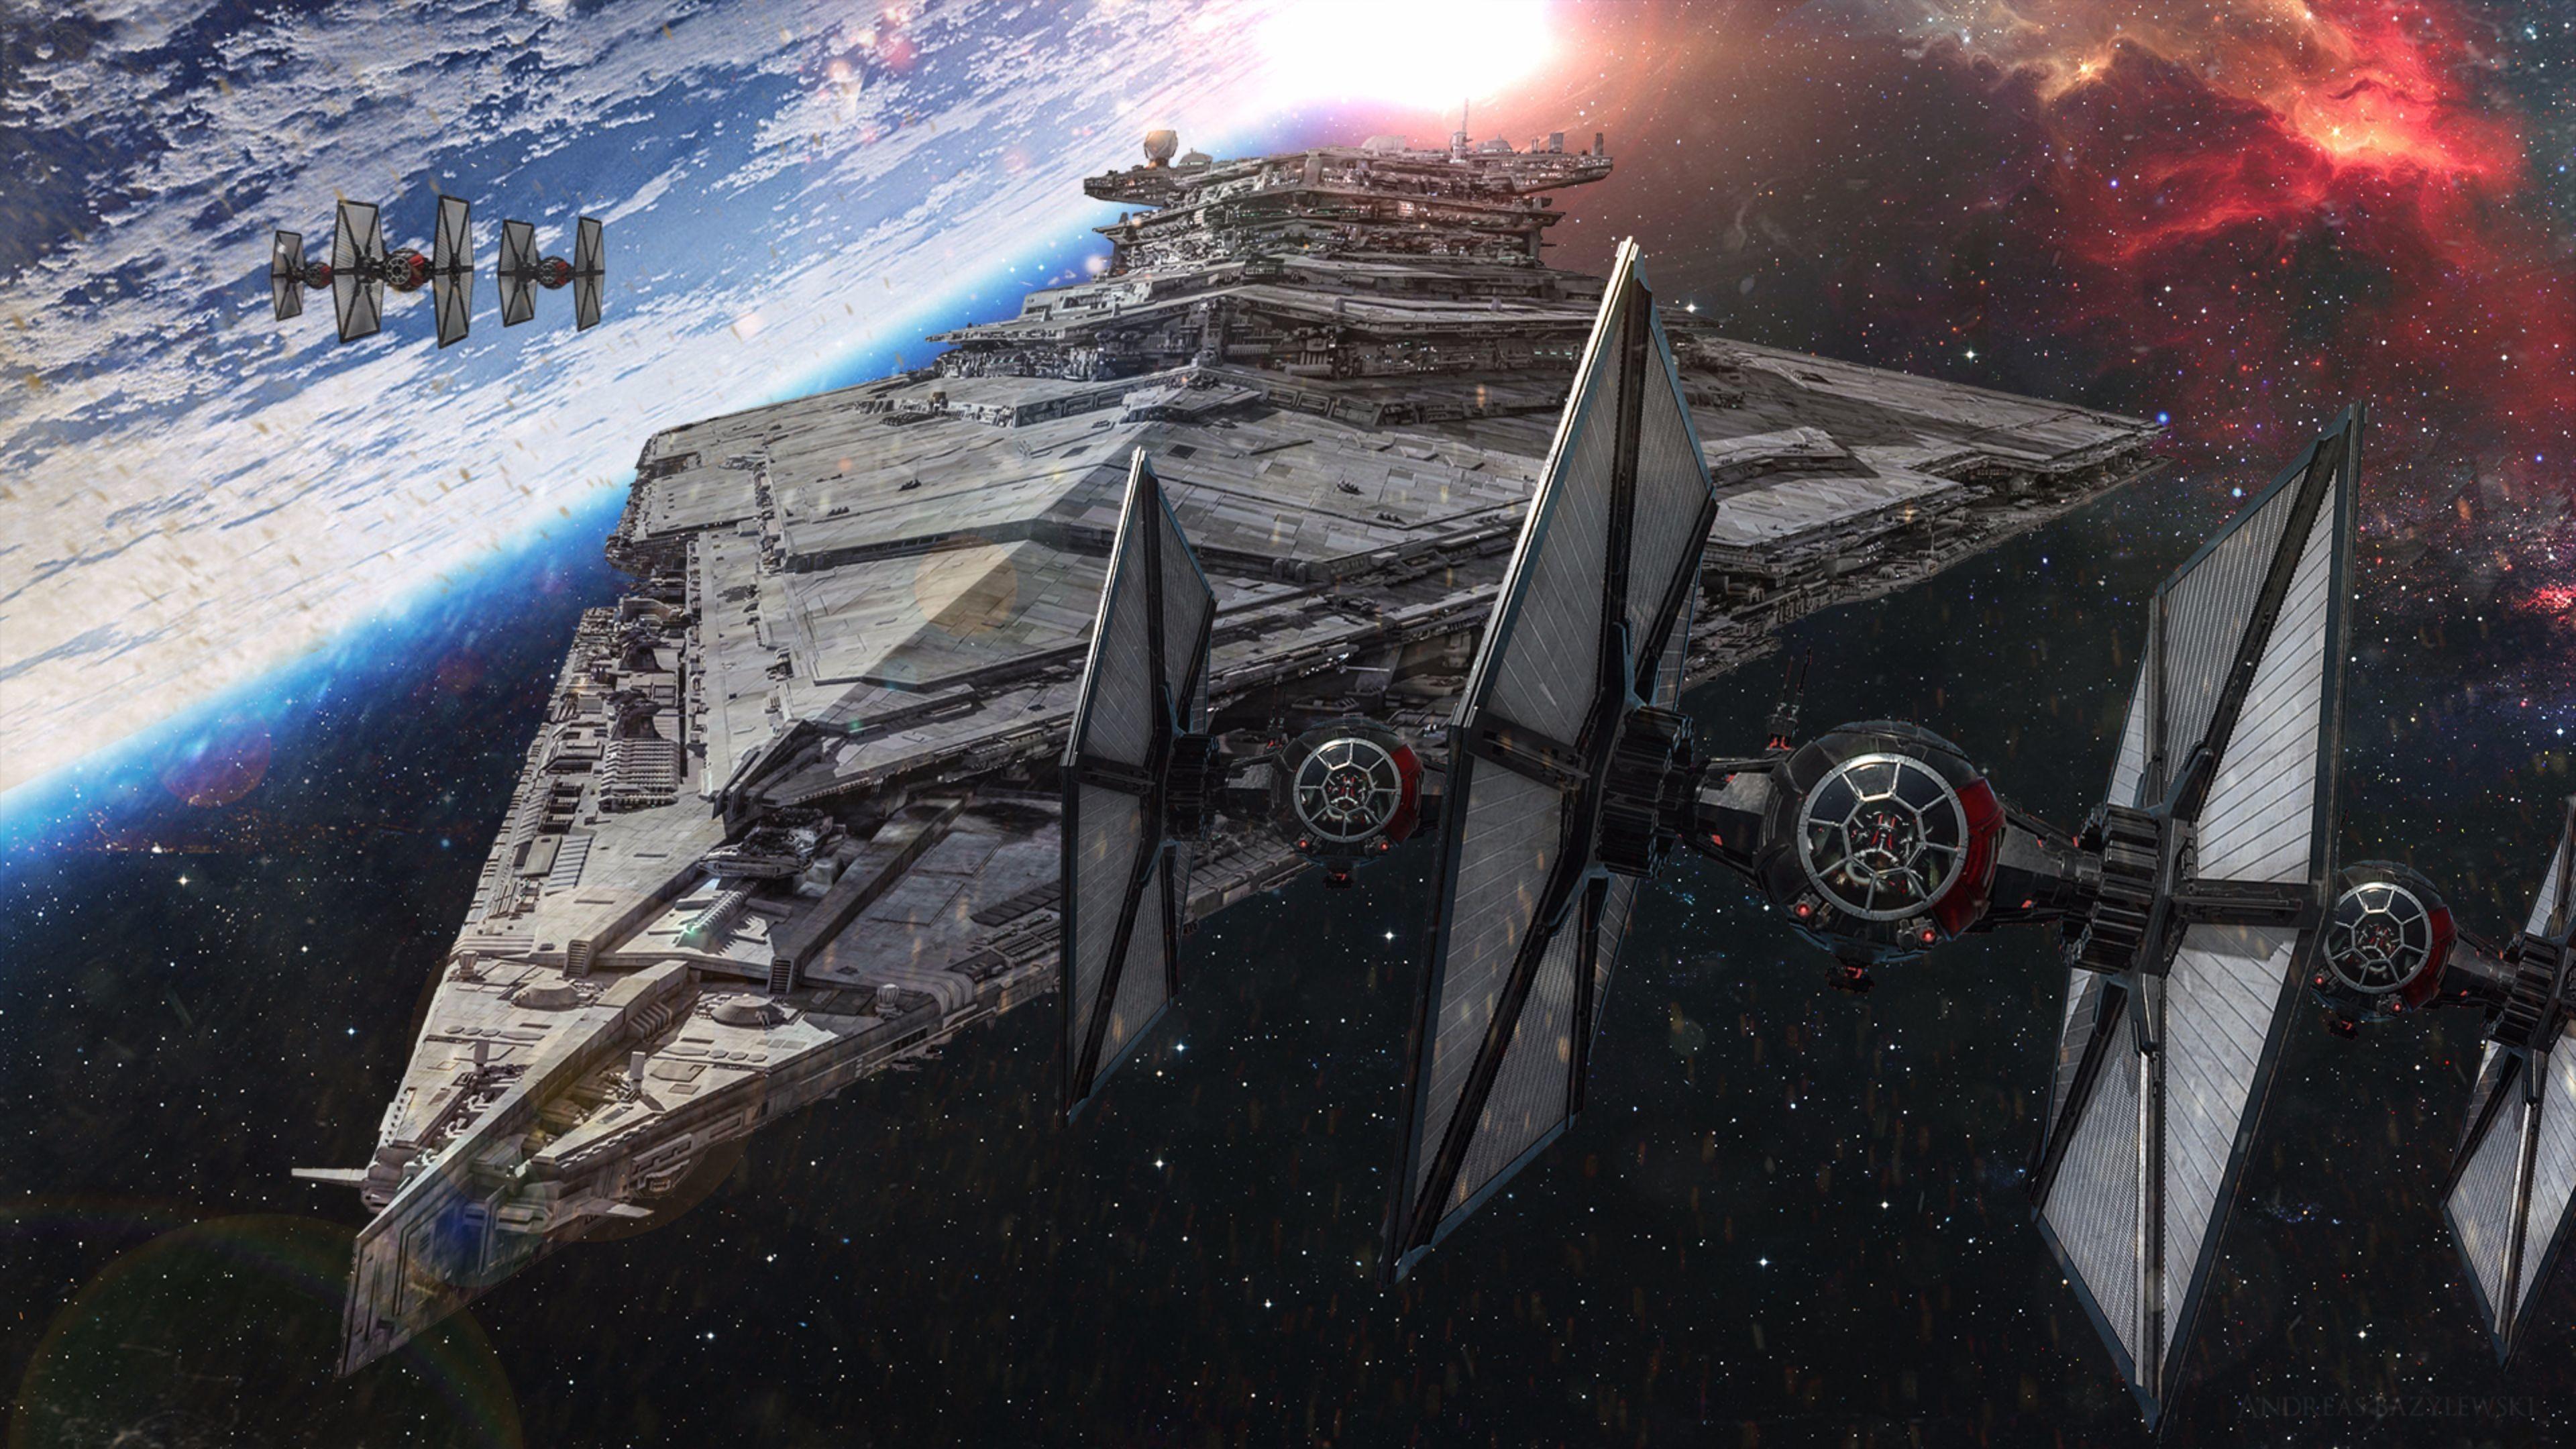 3840 X 2160 Star Wars Wallpapers Top Free 3840 X 2160 Star Wars Backgrounds Wallpaperaccess